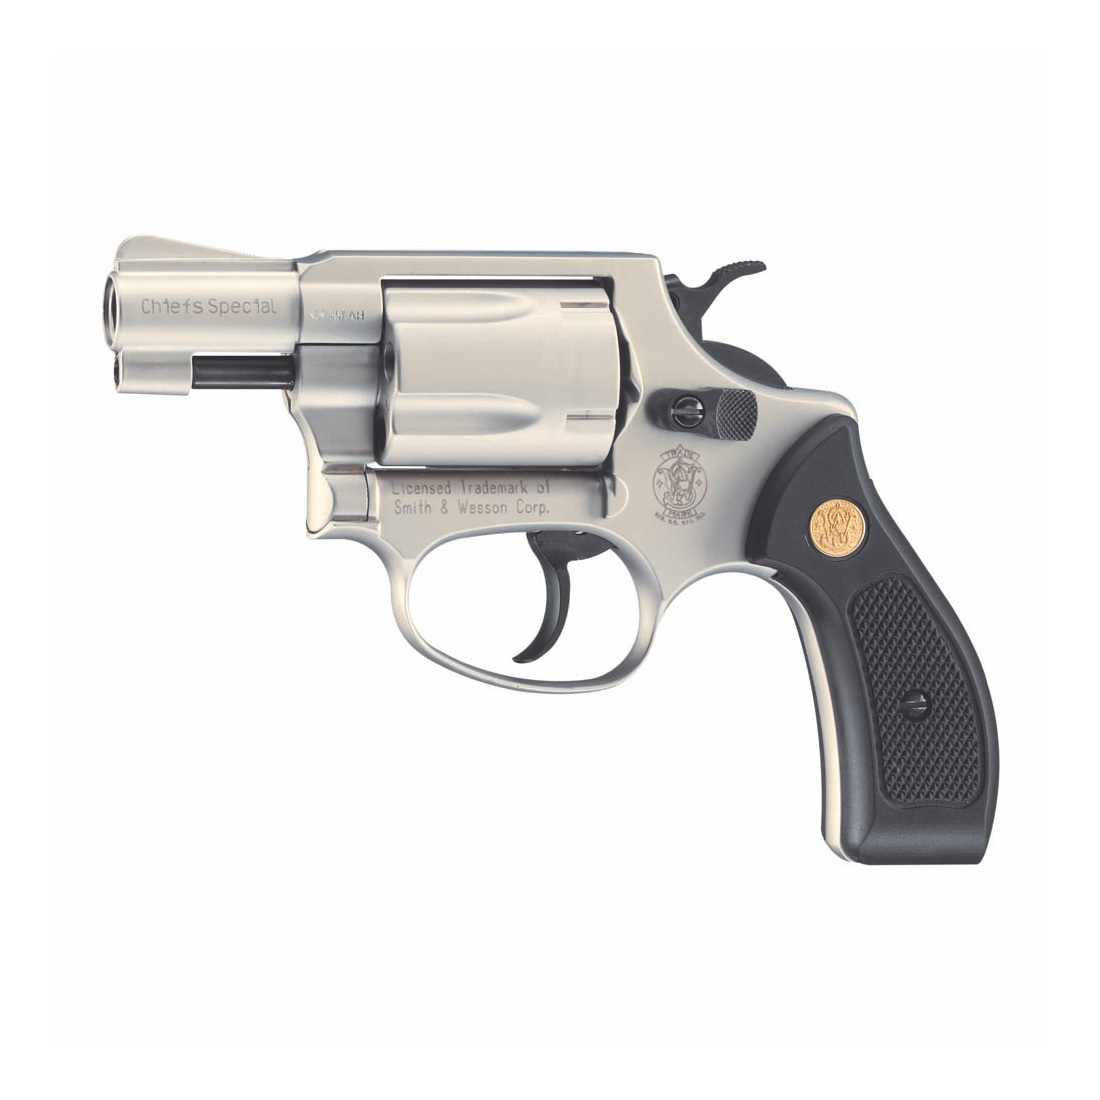 Umarex 348.02.09 Smith & Wesson Chiefs Special 9mm R.K. silver Pyro